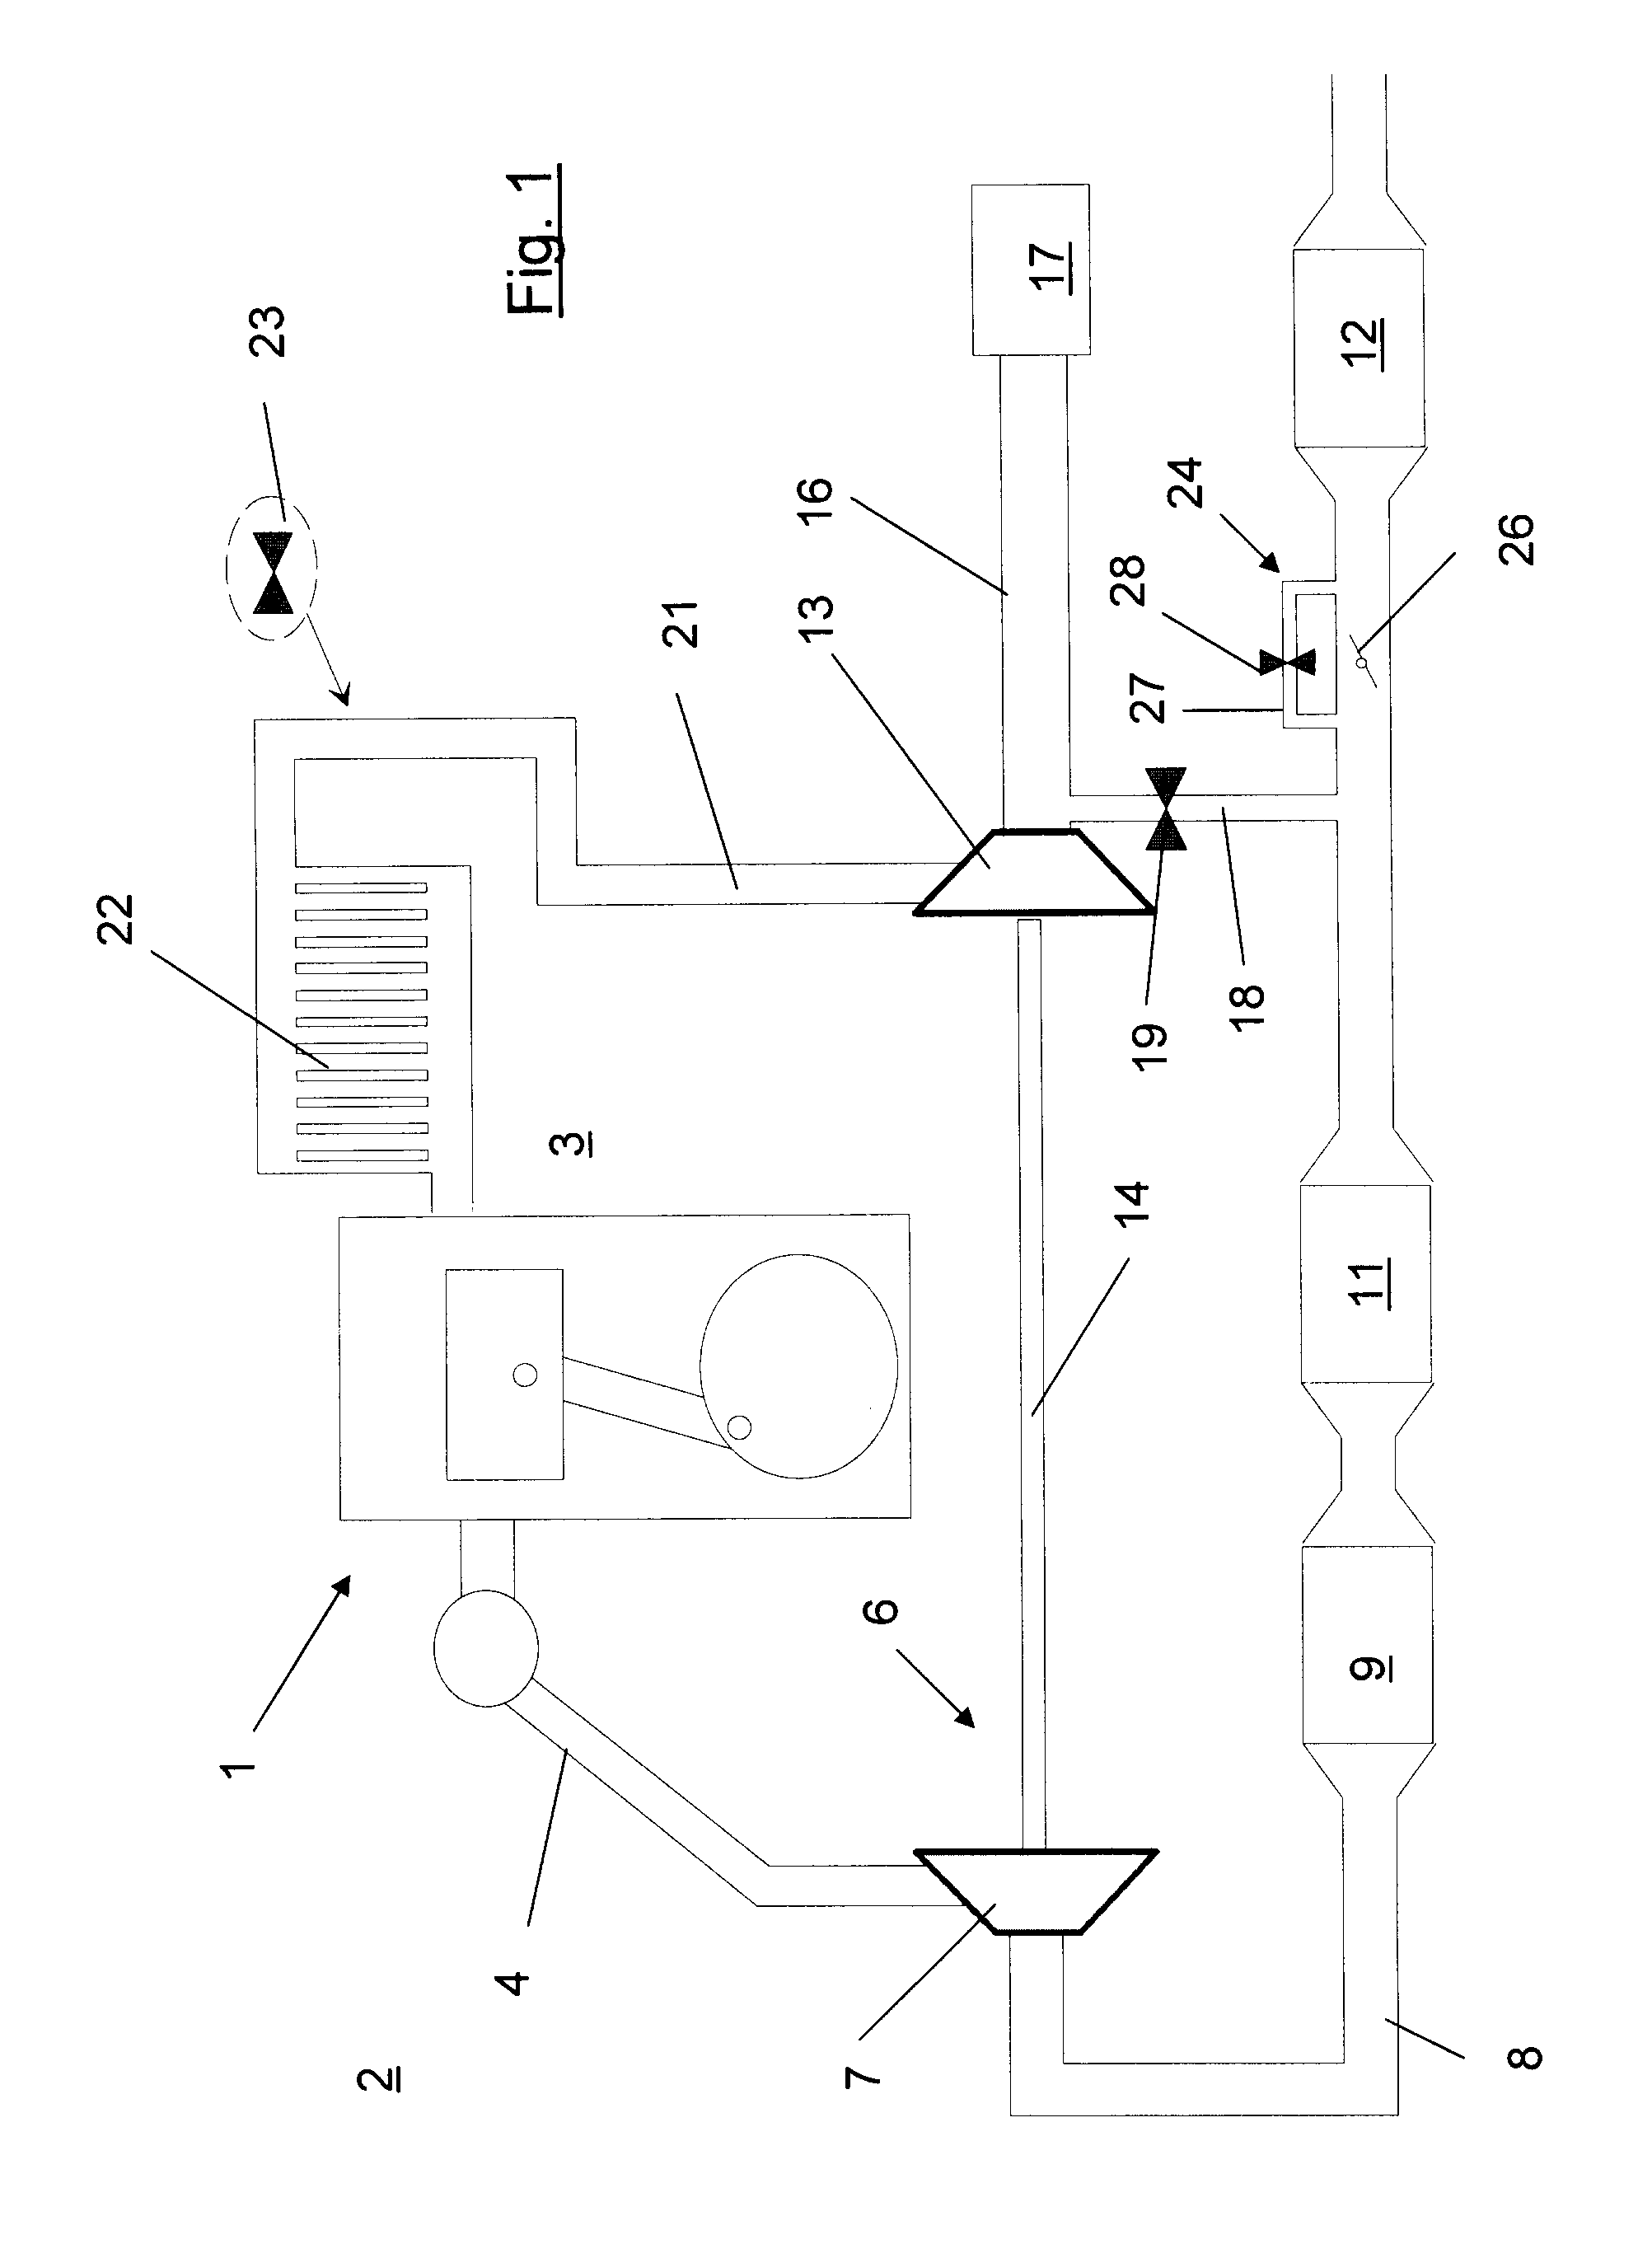 Control method for temporarily increasing the exhaust gas temperature